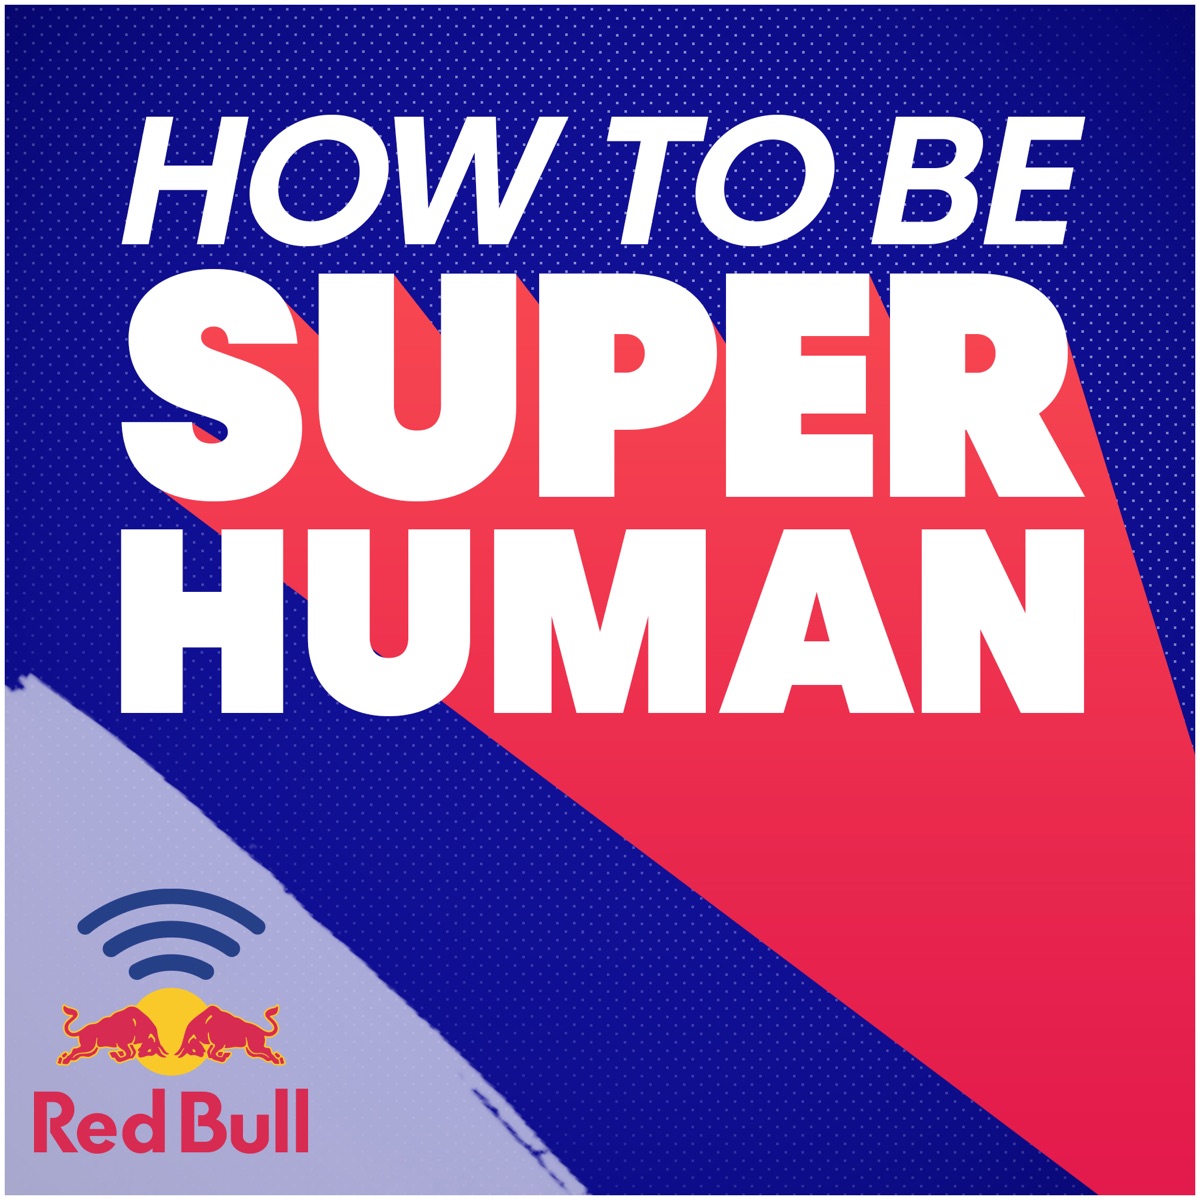 How to be Superhuman image